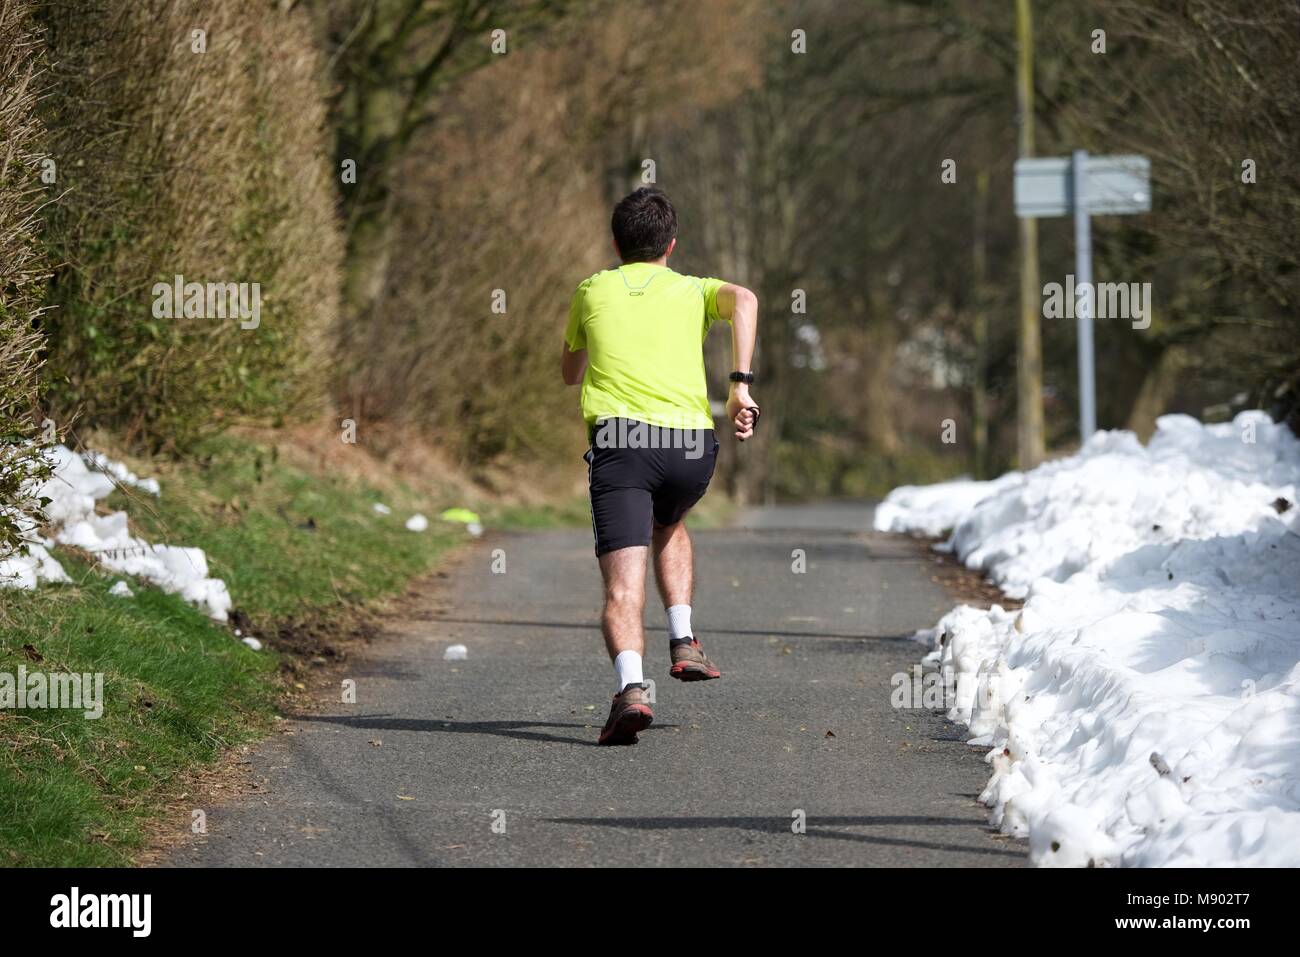 A runner does hill training. Stock Photo